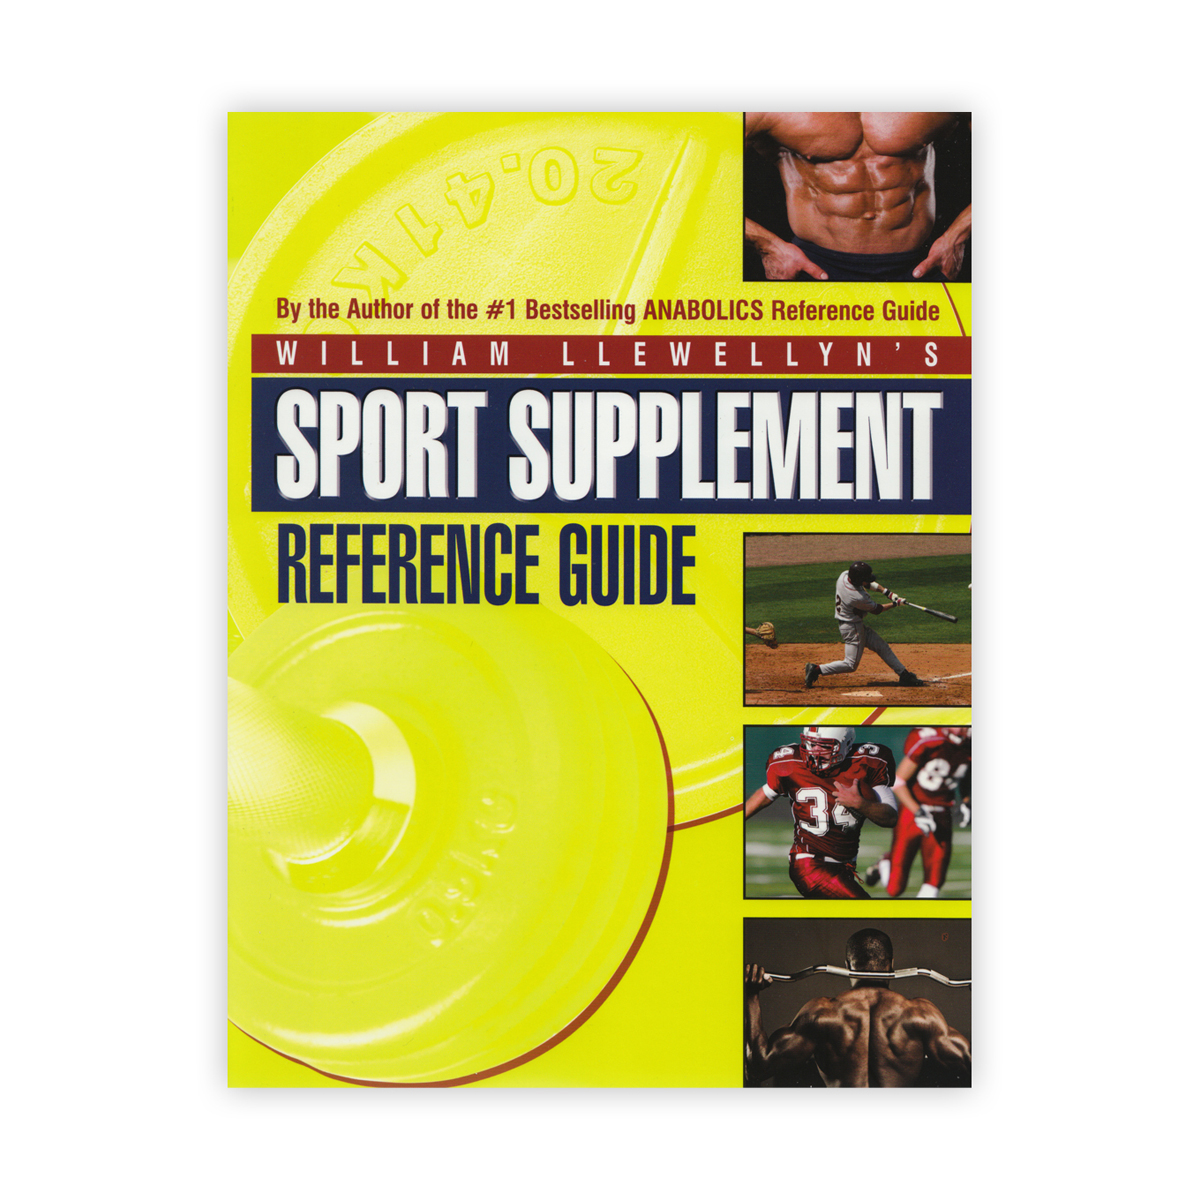 William Llewellyn's Sports Supplement Guide